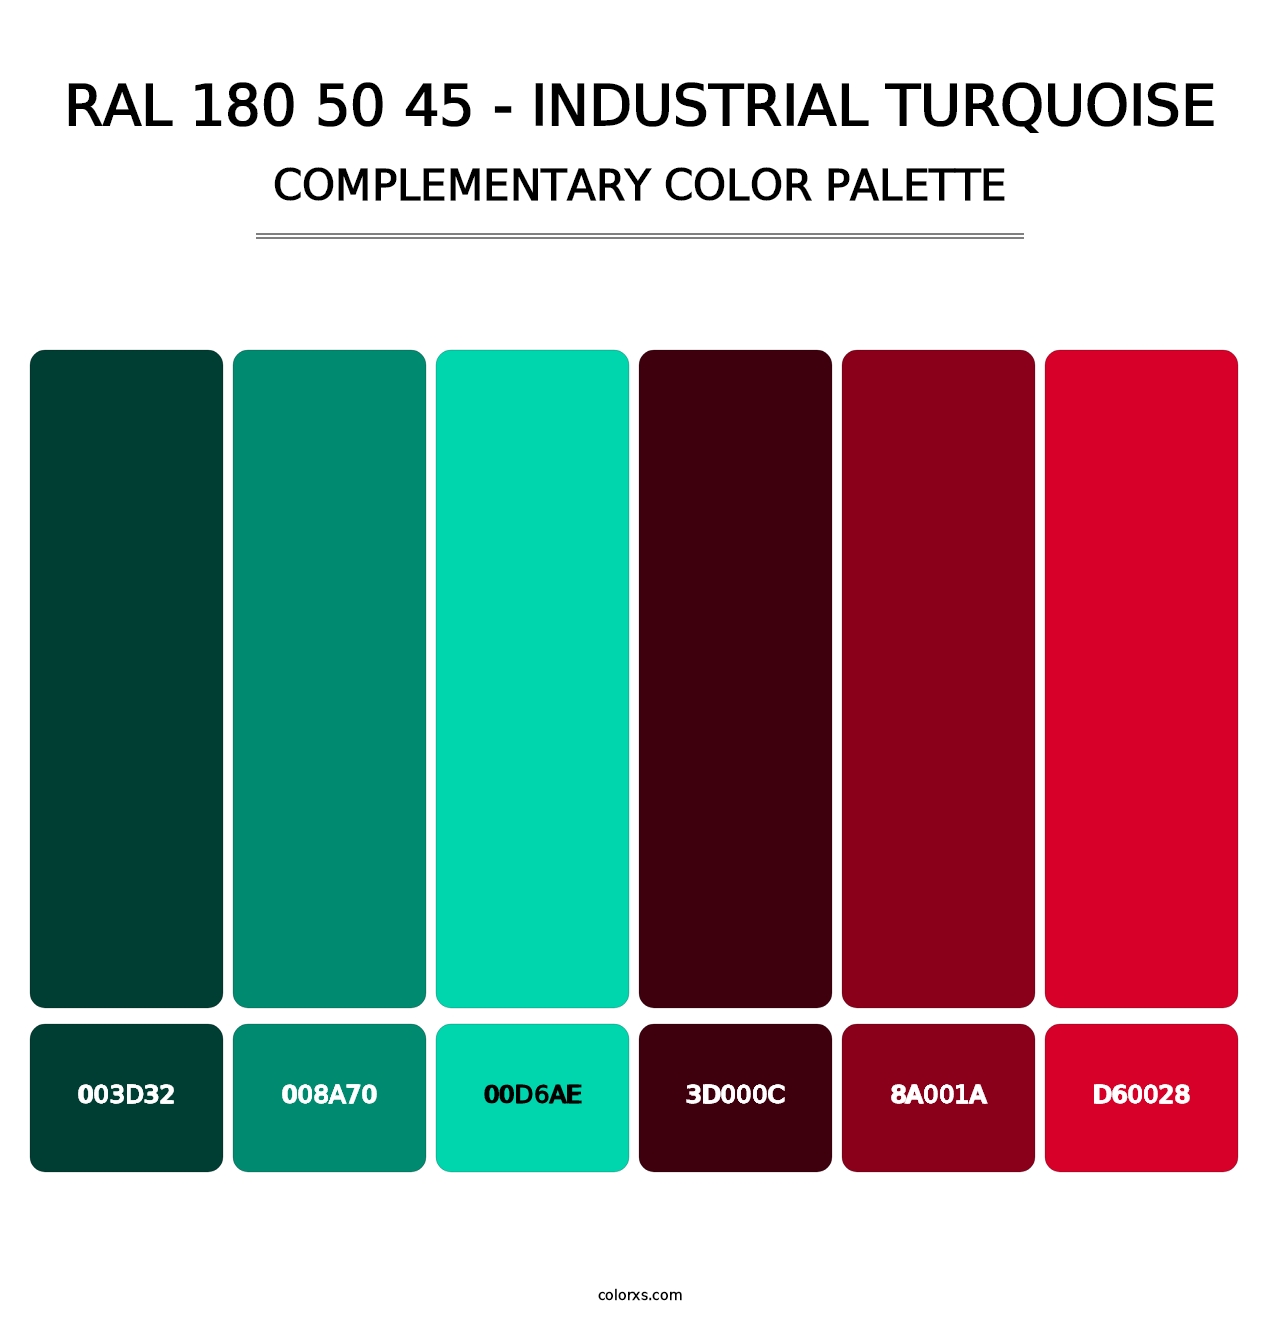 RAL 180 50 45 - Industrial Turquoise - Complementary Color Palette